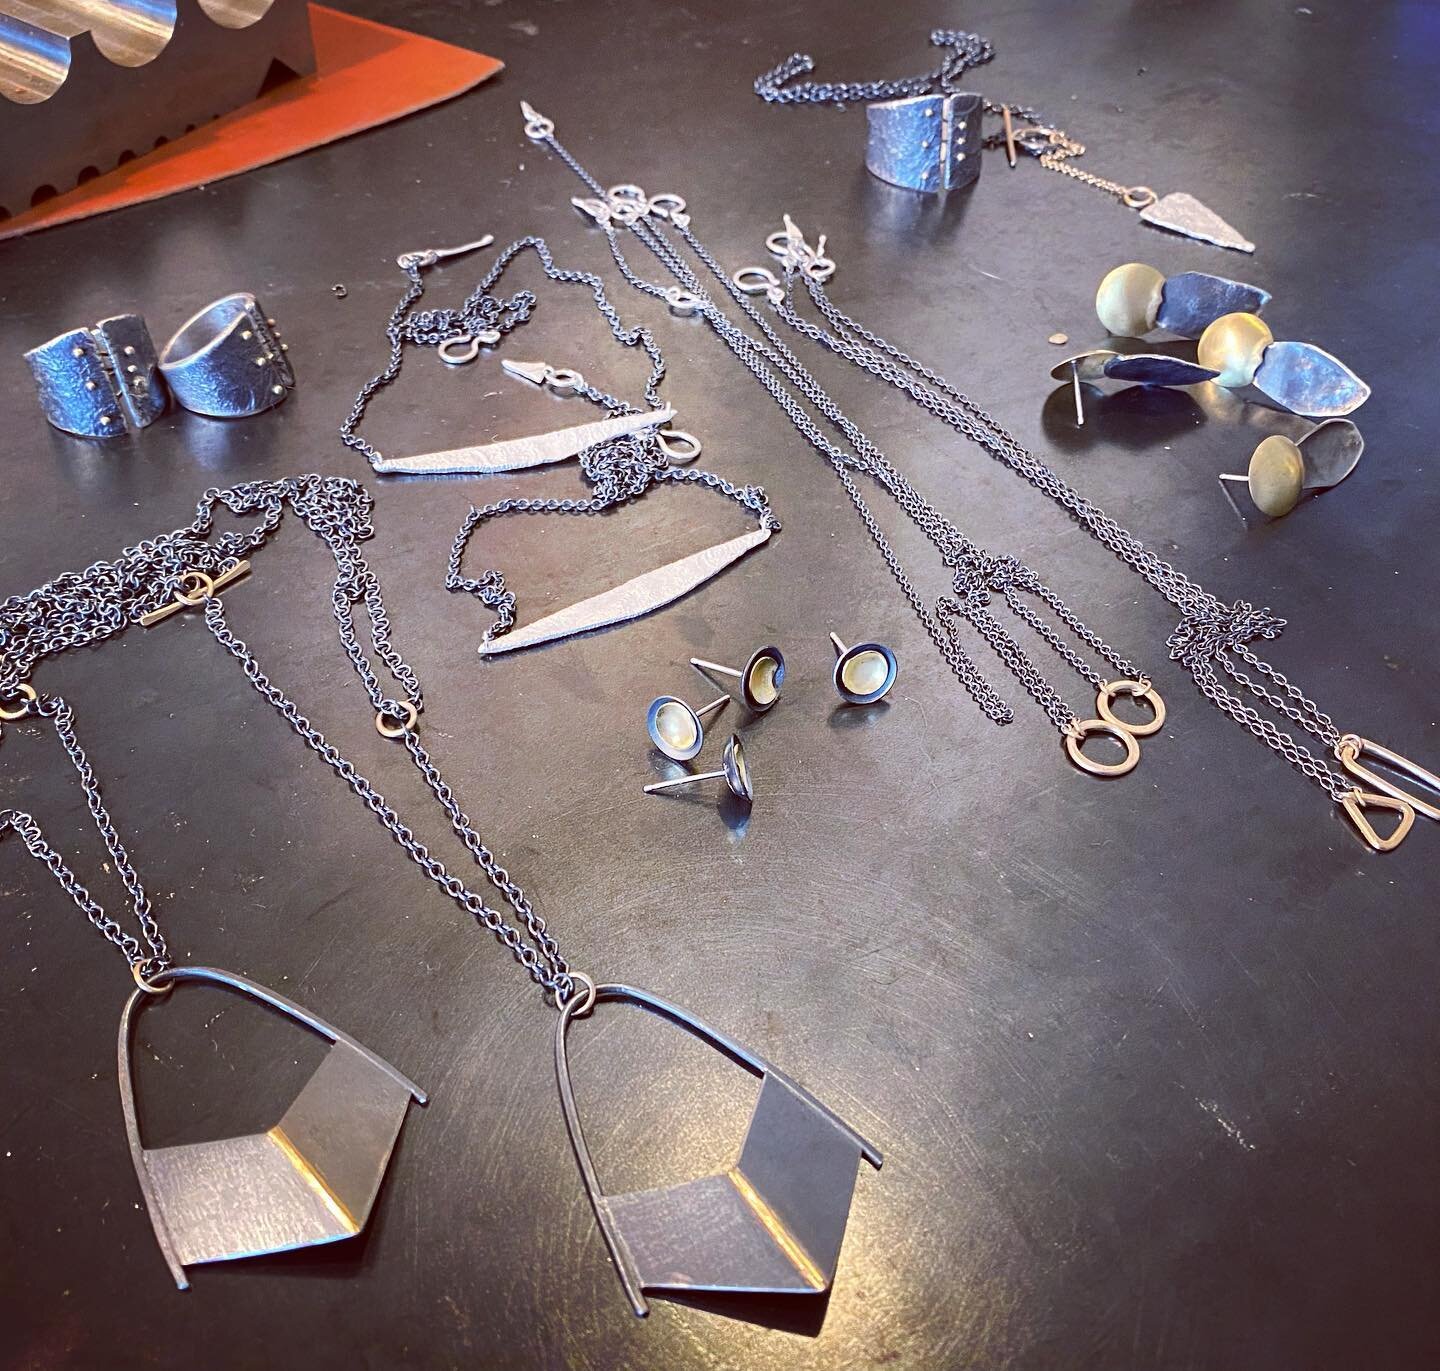 Production time! Last minute odds and ends before heading to the Brookside Art Annual in Kansas City this weekend, Friday through Sunday. Excited to see you all there! Booth #5

#esthermetals #brooksideartannual #handmadejewelry #madeinmontana